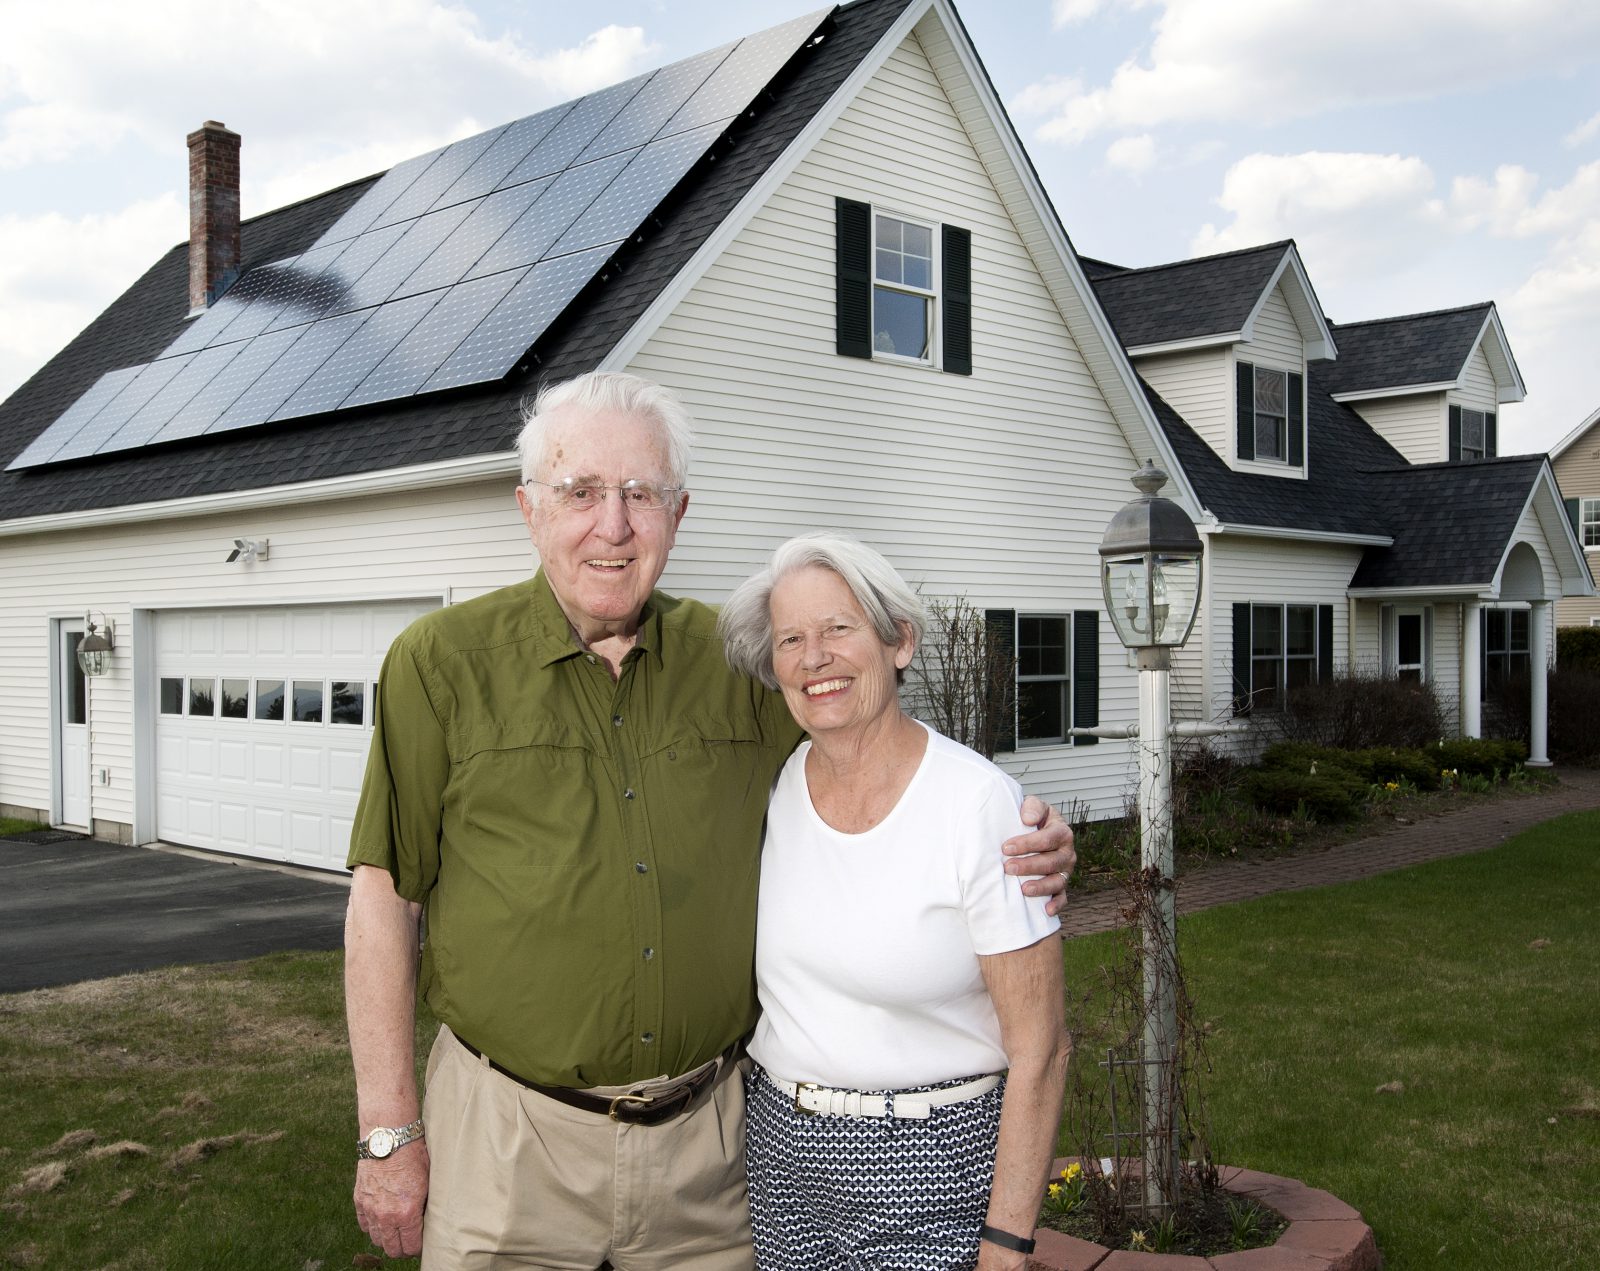 leasing or buying solar in vermont